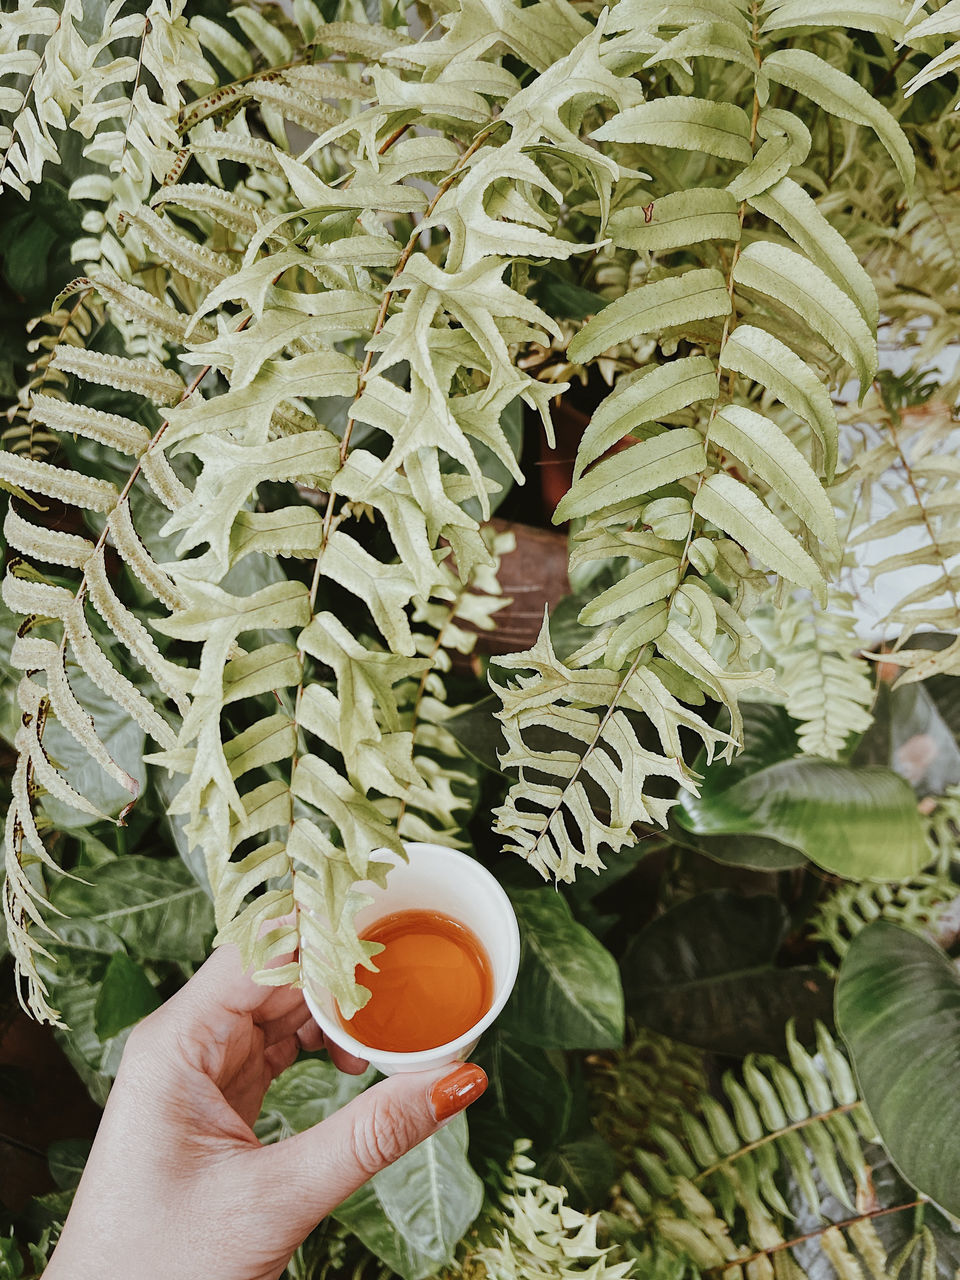 hand, food and drink, holding, one person, plant, leaf, growth, nature, plant part, flower, food, adult, tree, green, healthy eating, freshness, ferns and horsetails, lifestyles, day, agriculture, high angle view, drink, outdoors, personal perspective, produce, wellbeing, finger, close-up